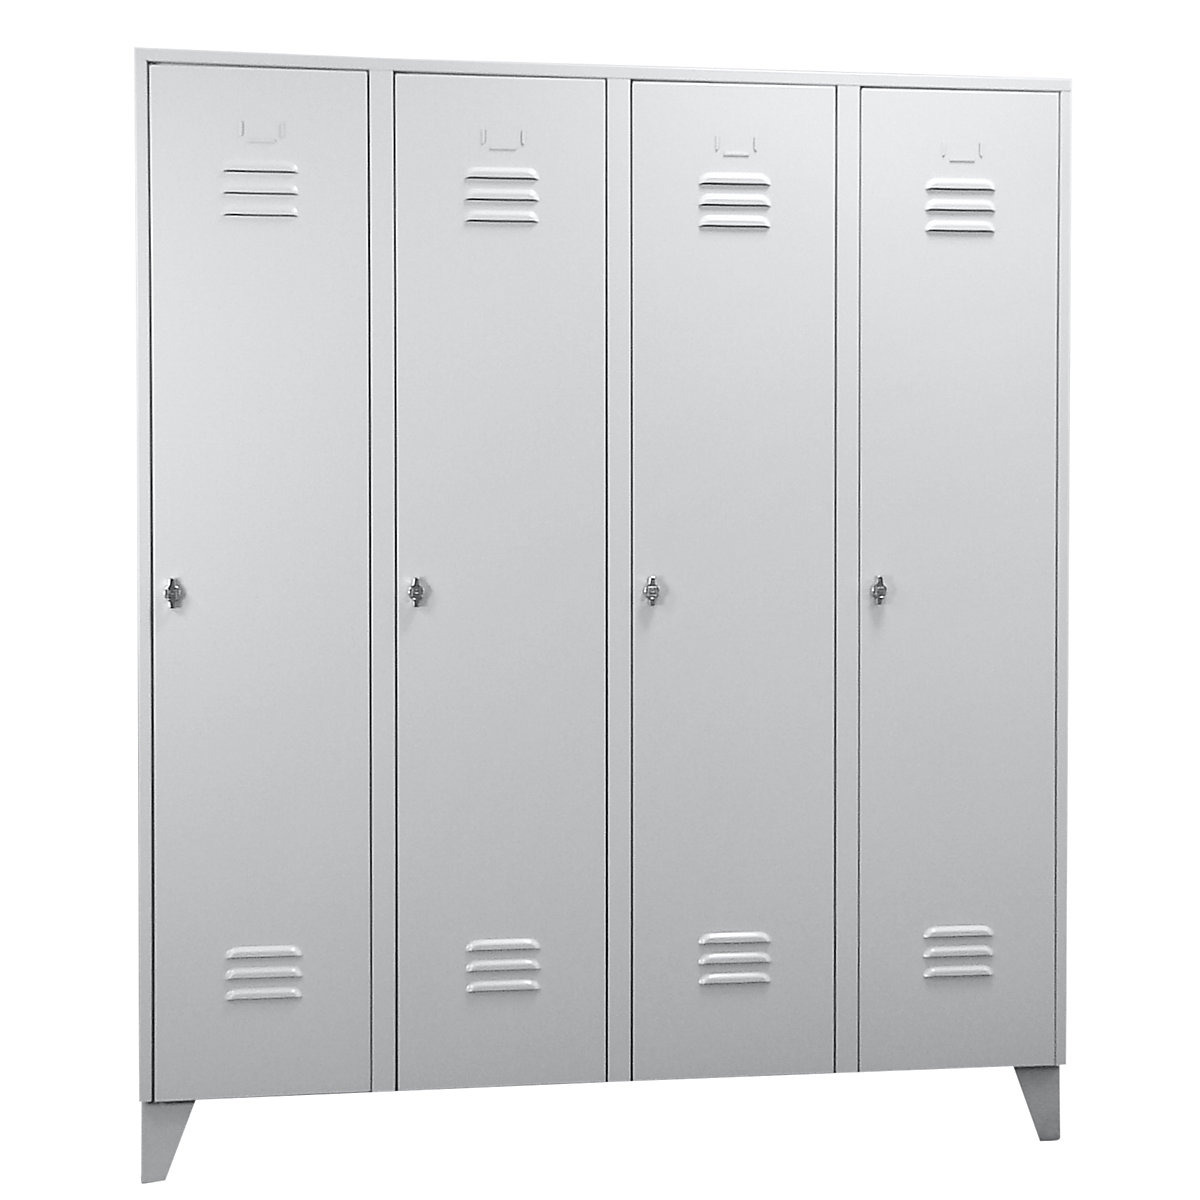 Steel locker with stud feet – Wolf, full height compartments, solid doors, compartment width 400 mm, 4 compartments, light grey-18